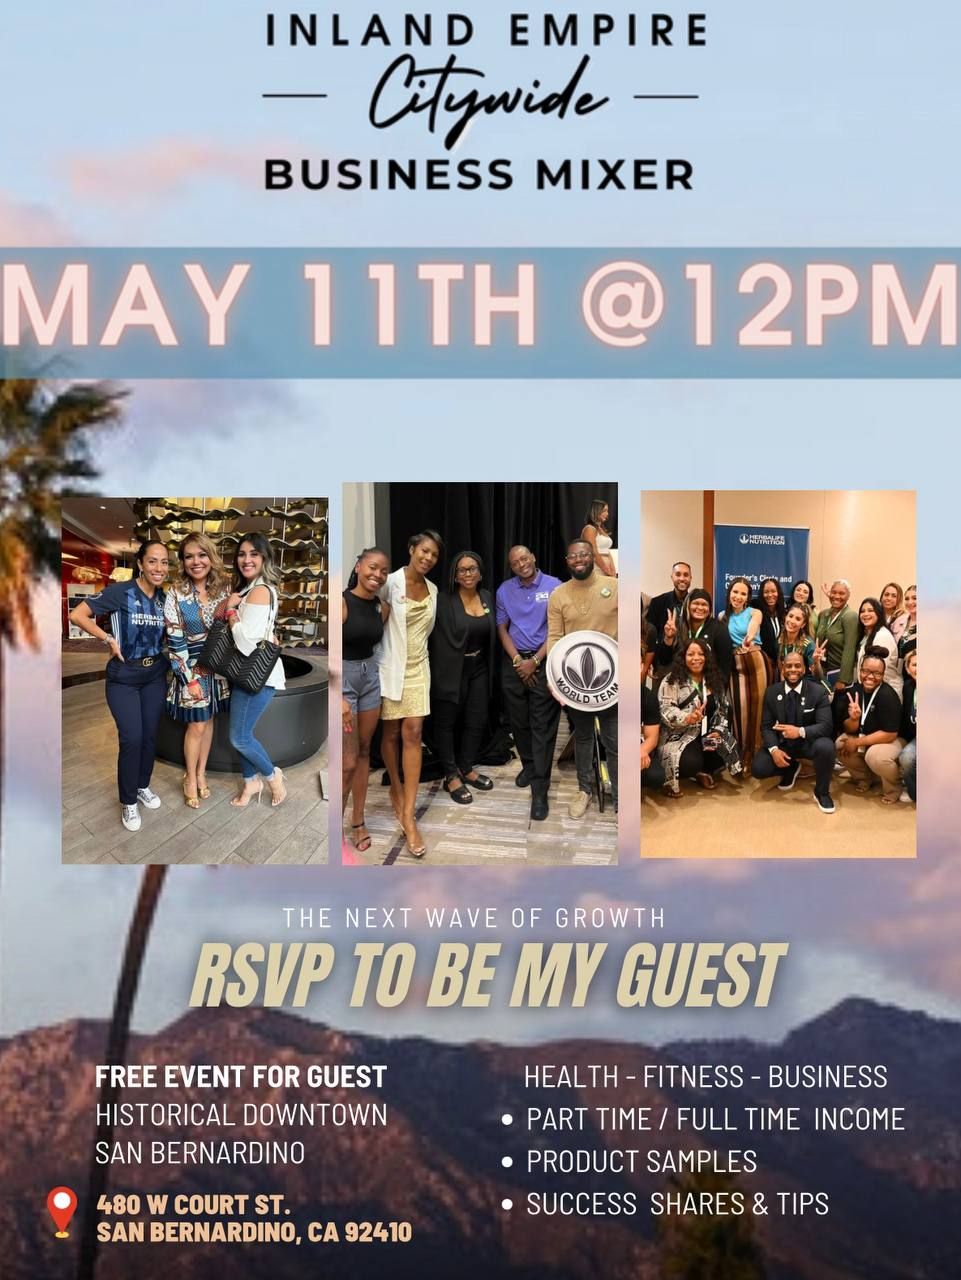 INLAND EMPIRE CITYWIDE MIXER